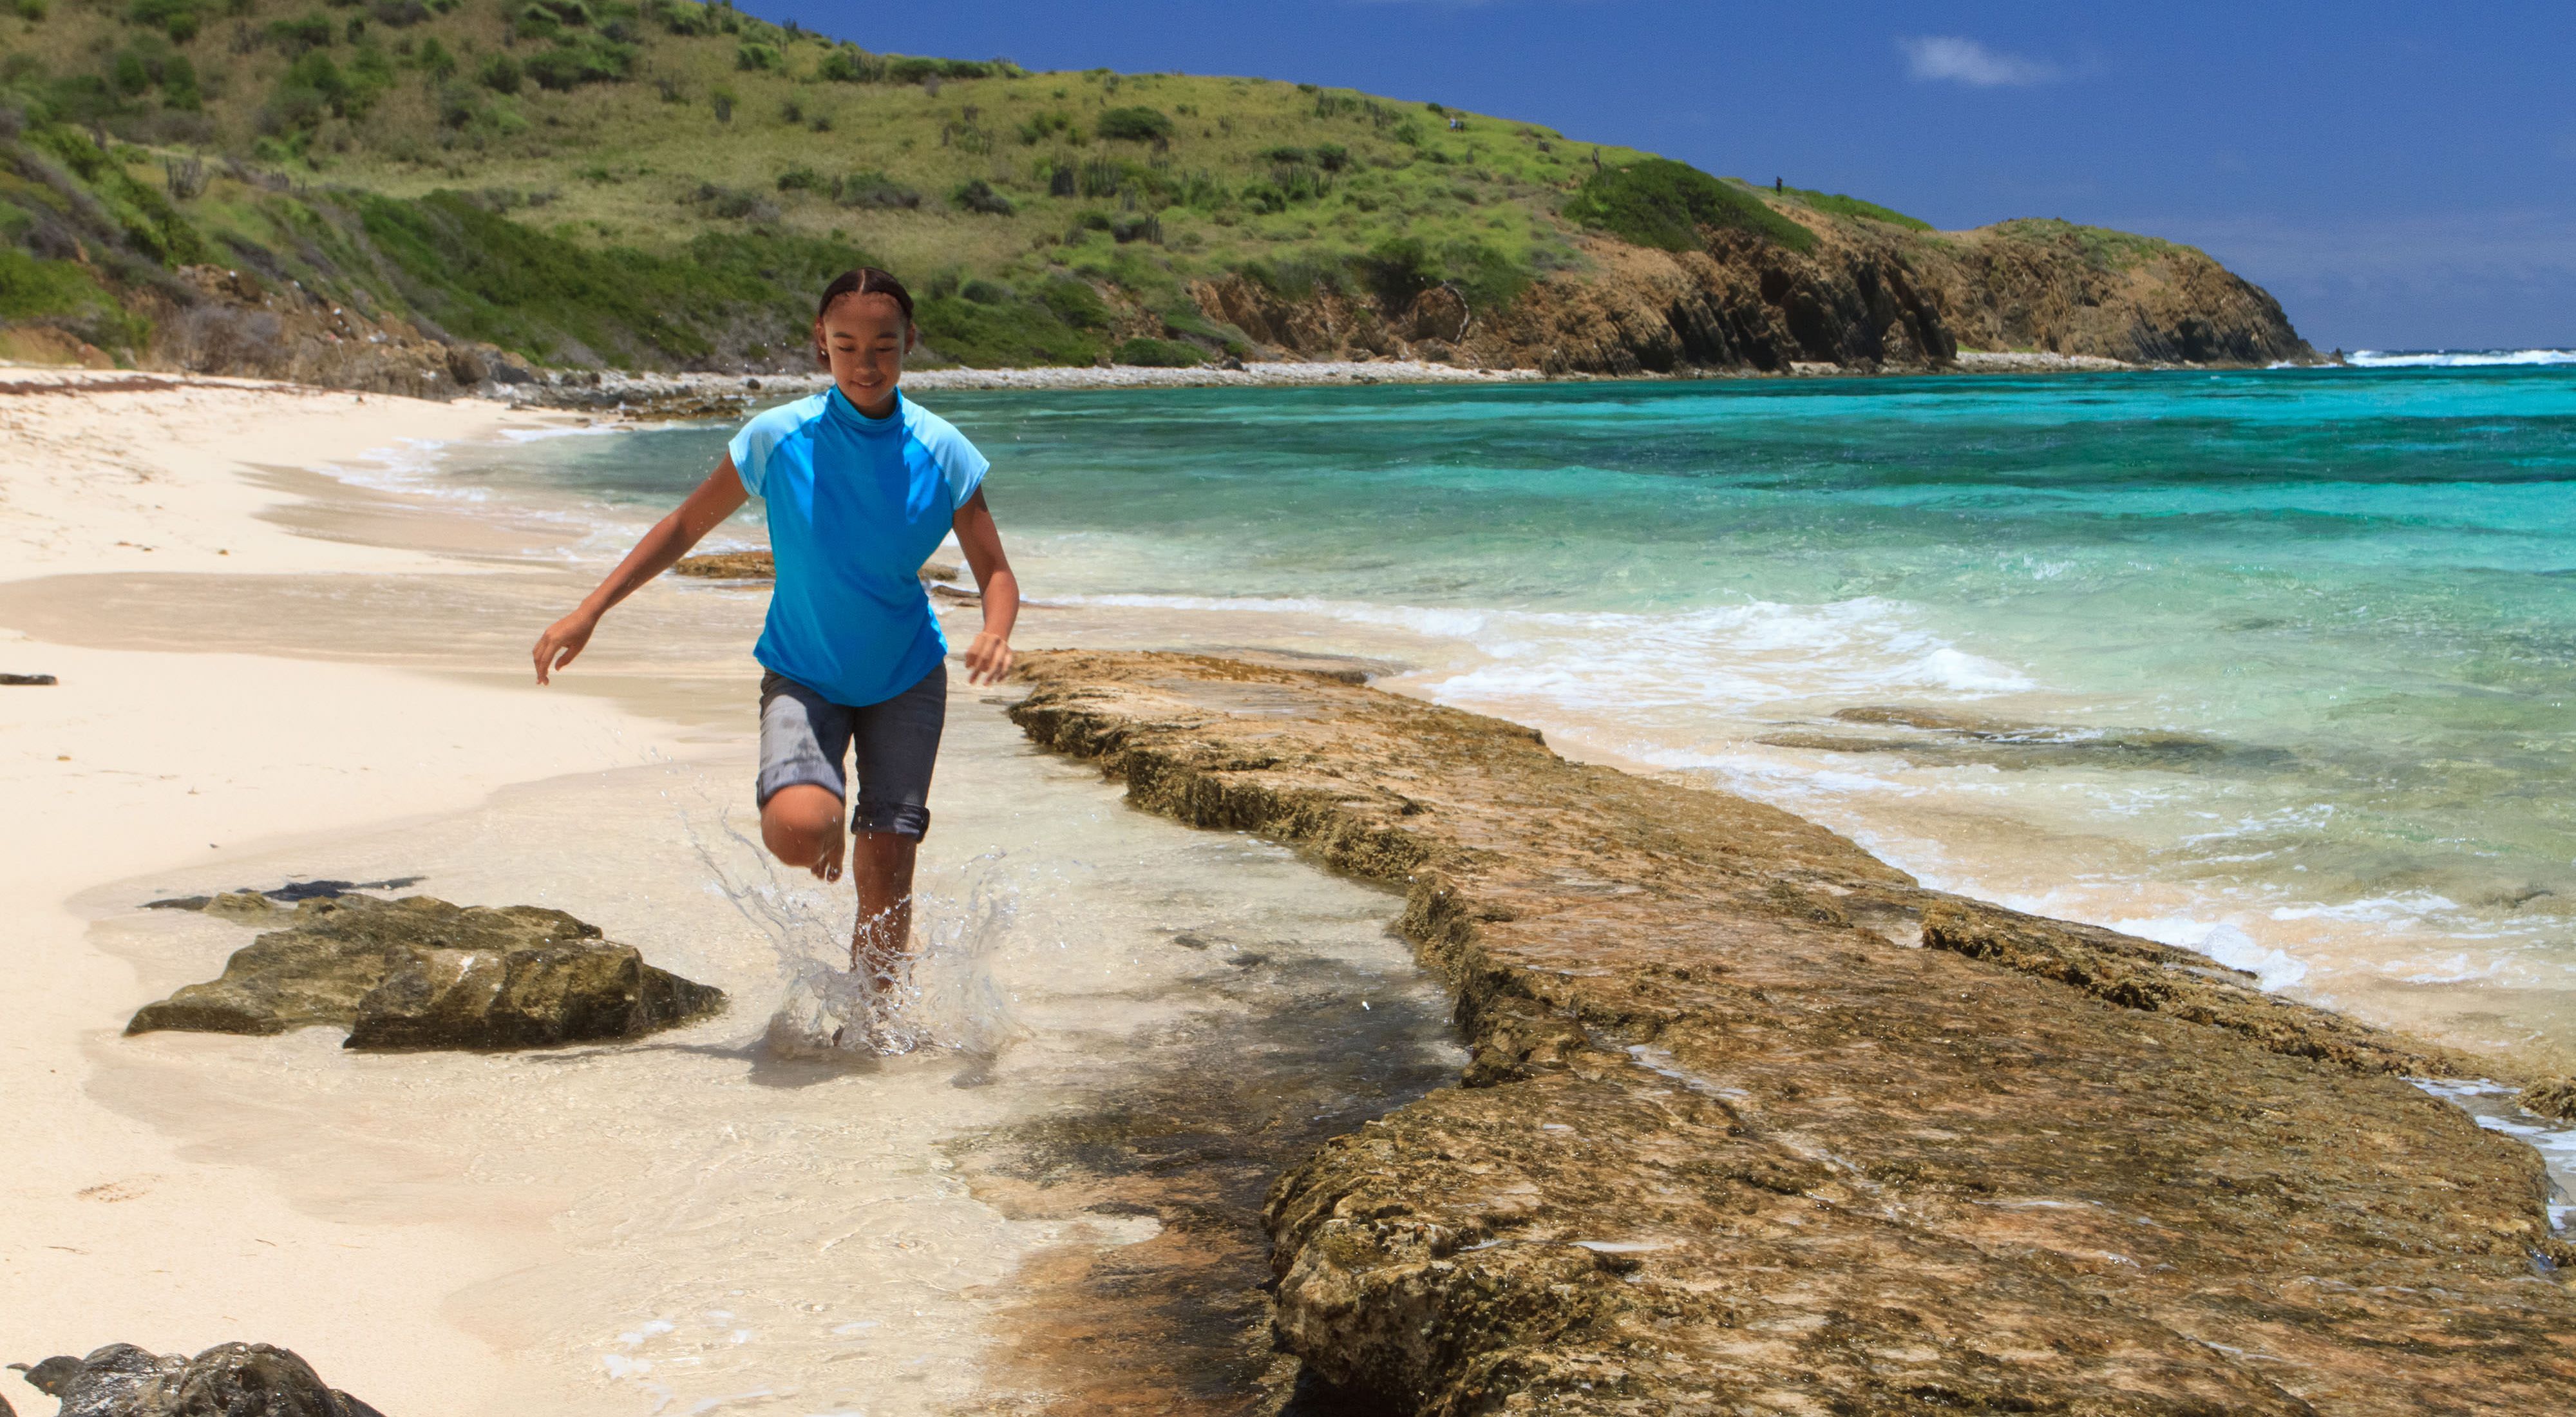 A girl runs along the beach at Jack and Isaac Bay Preserve in St. Croix, U.S. Virgin Islands.